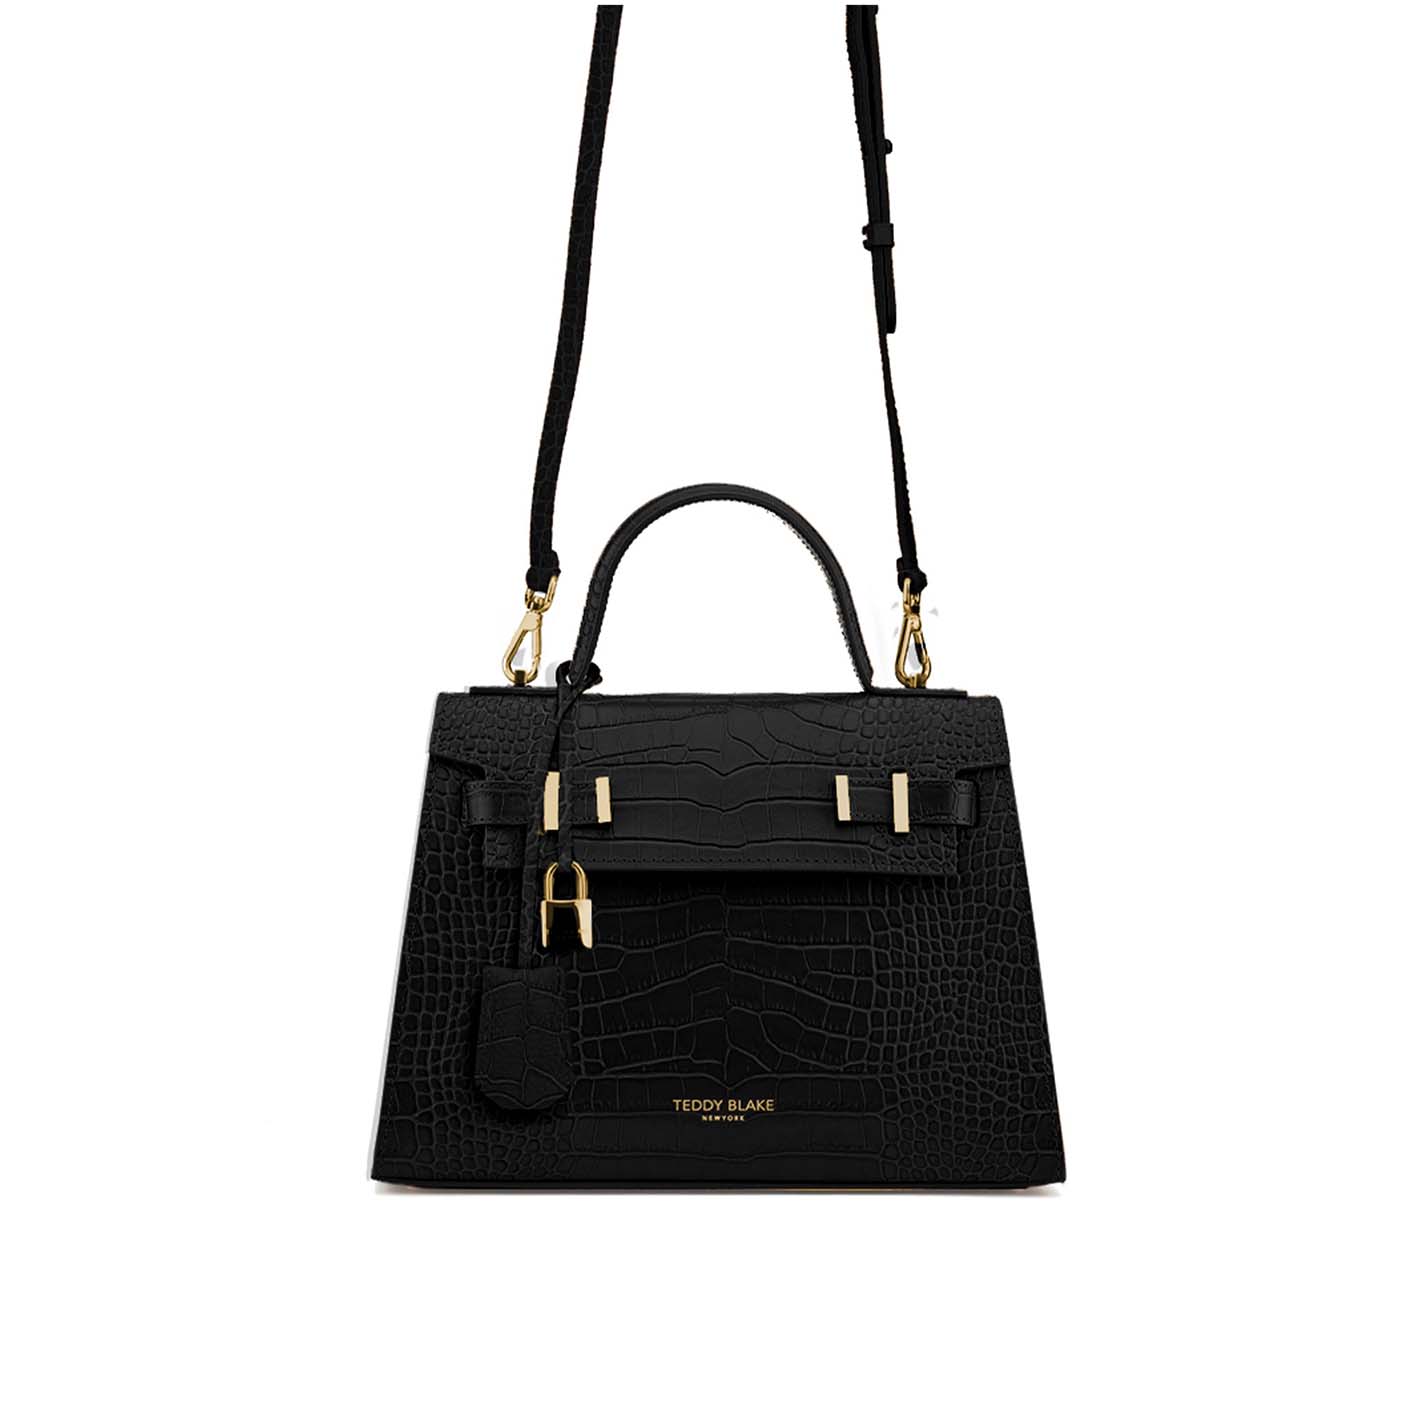 ava-croco-gold-11-black-leather-bag-with-handle